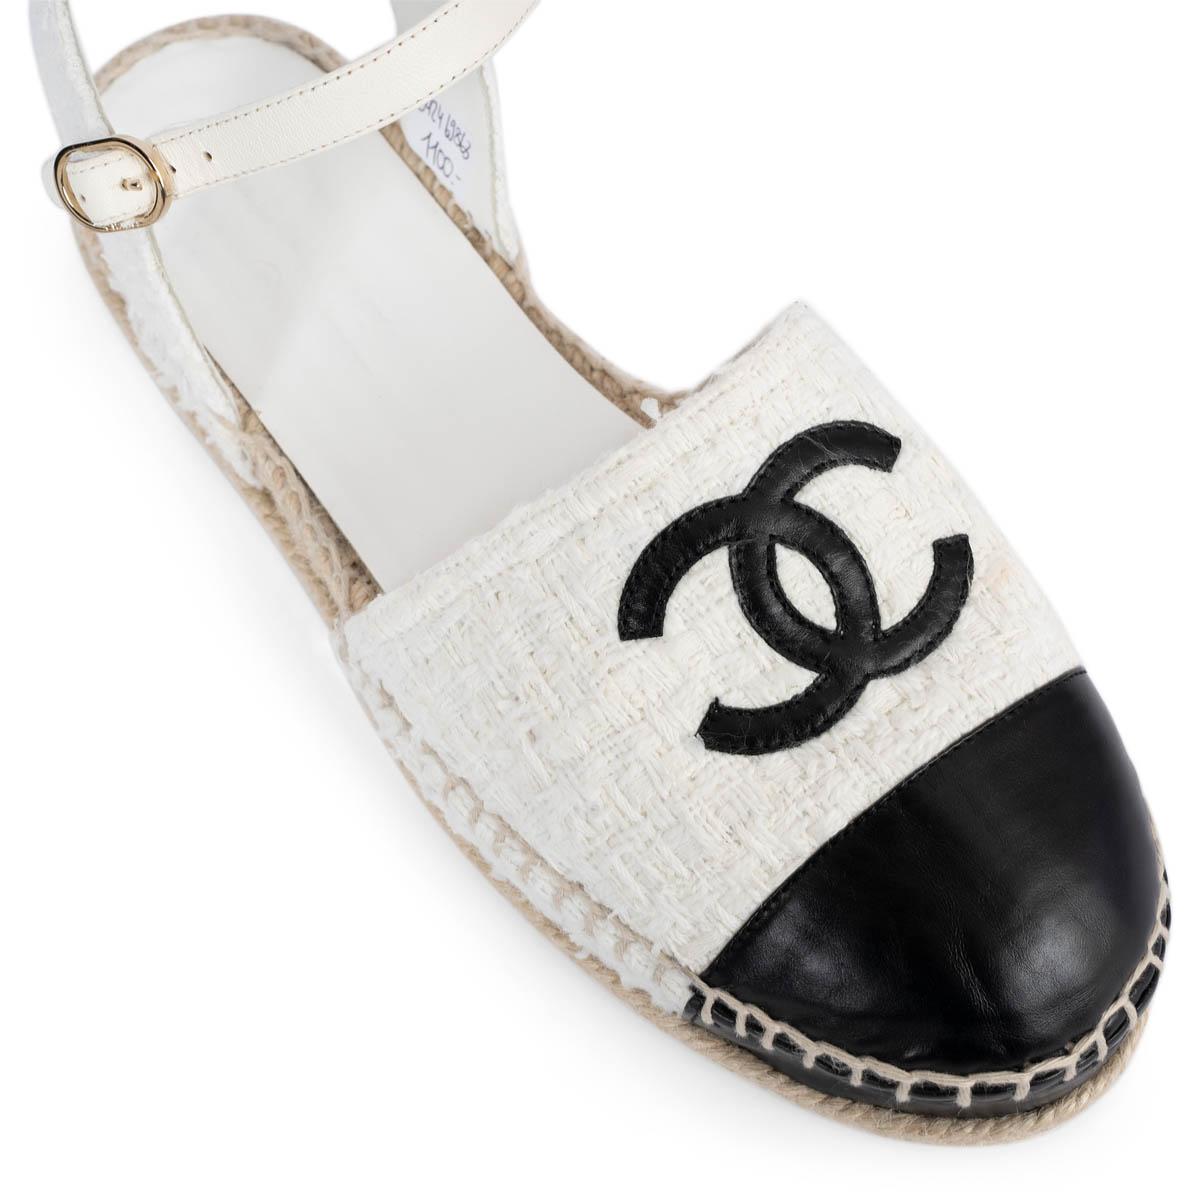 CHANEL white 2020 20P TWEED ESPADRILLES Shoes 39 For Sale 3